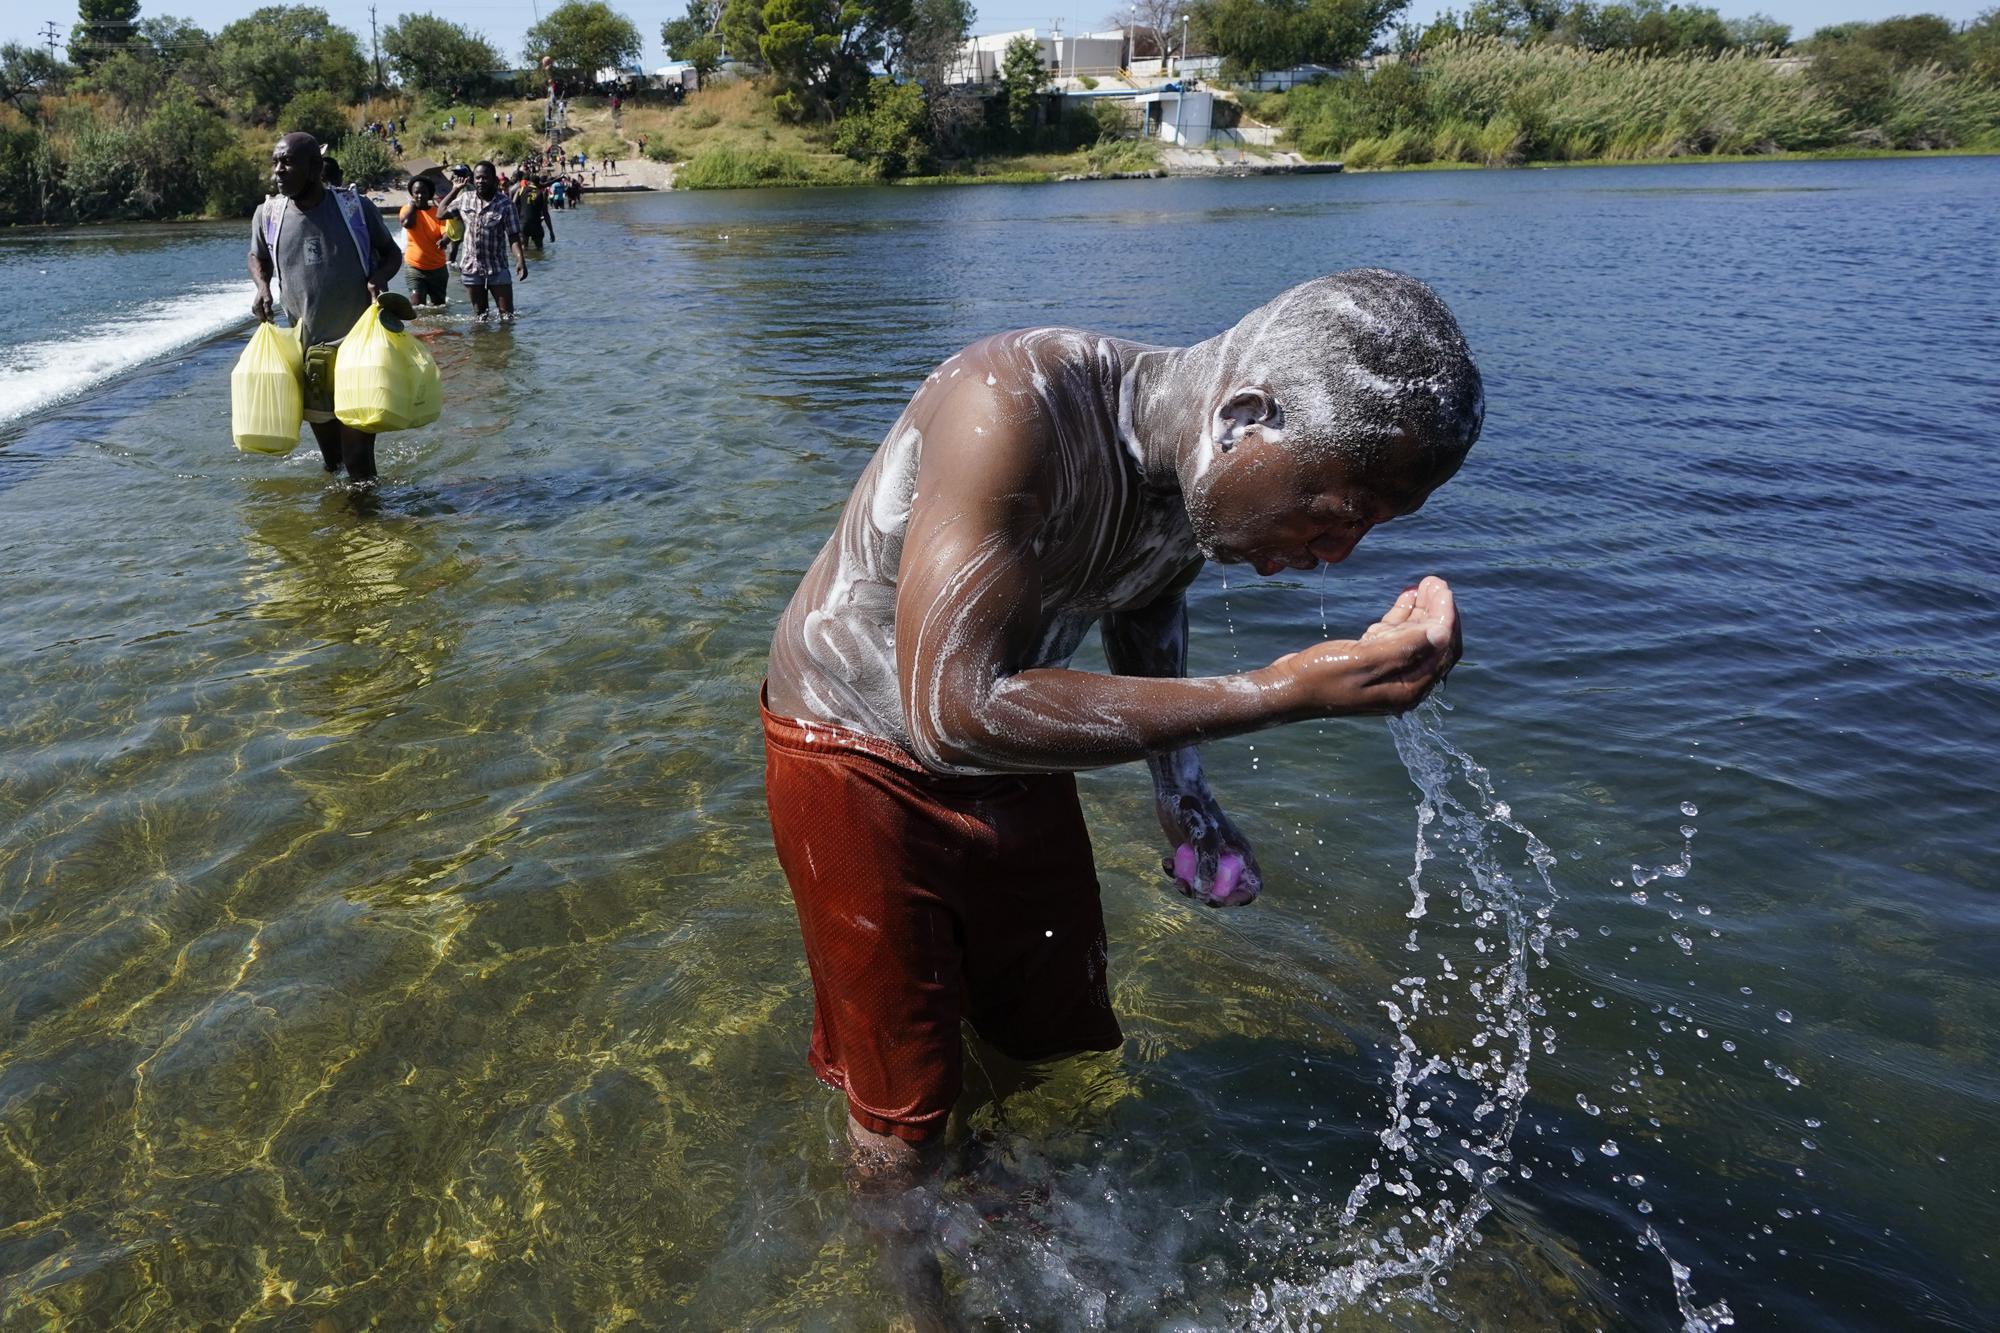 FILE - A Haitian migrant uses the Rio Grande to take a bath after crossing a dam from Mexico to the United States, Sept. 17, 2021, in Del Rio, Texas. The Border Patrol encountered migrants in South Texas more often than ever in June and July, dashing expectations for a common summer slowdown. In September, about 15,000 mostly Haitian refugees were camped under a bridge in the small border town of Del Rio, Texas. (AP Photo/Eric Gay, File)